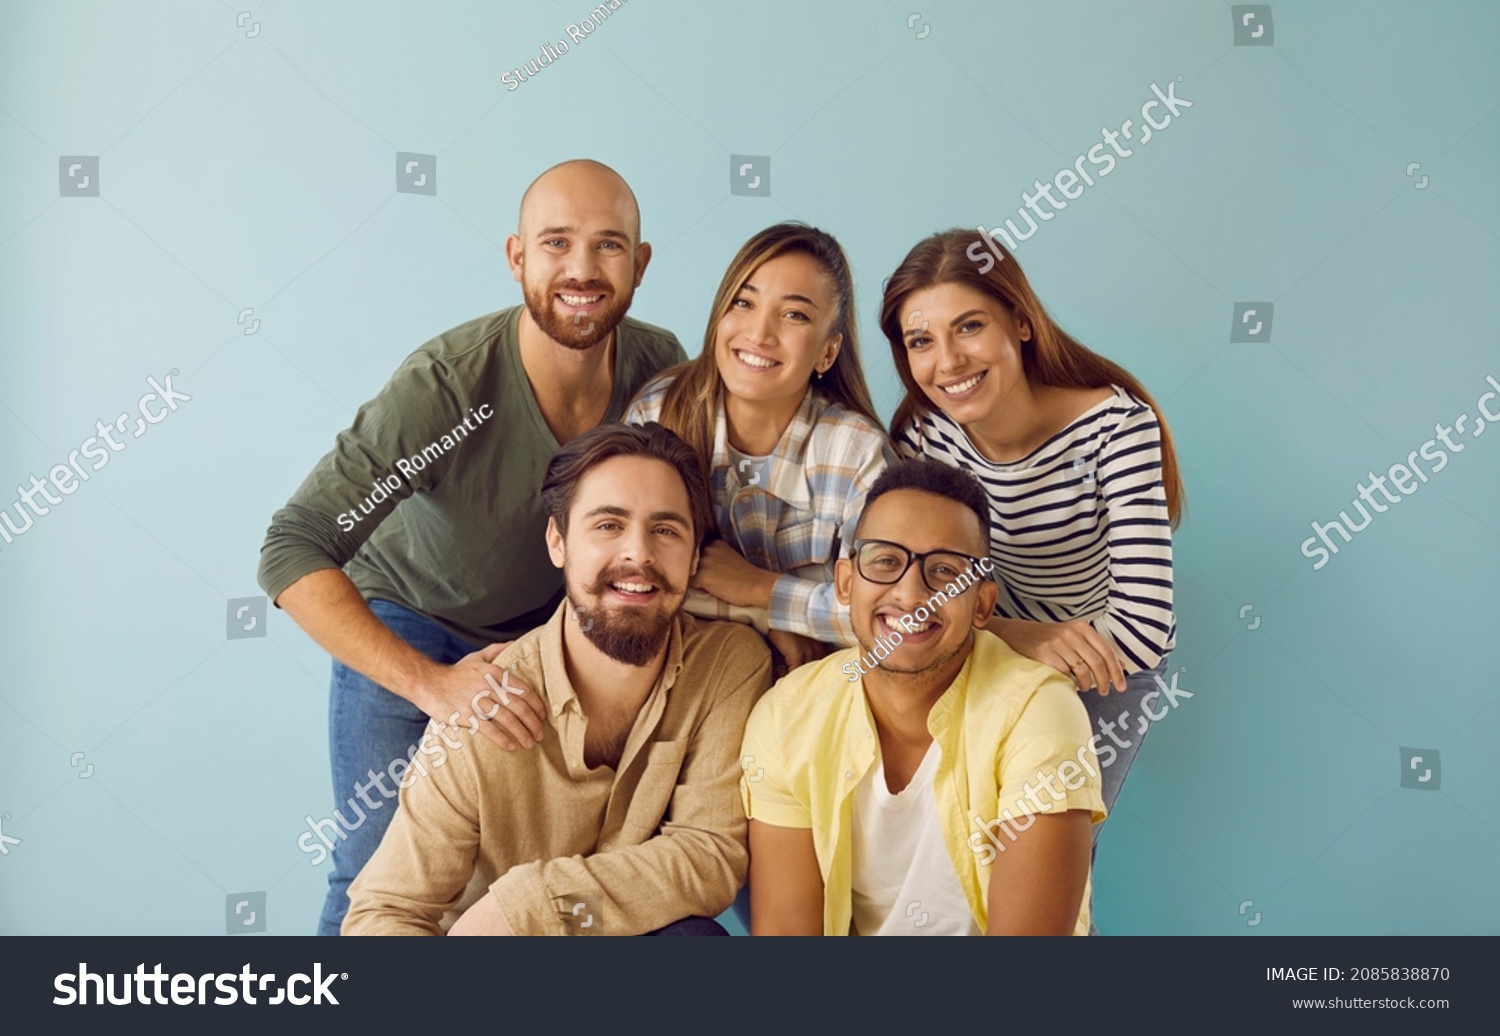 Group portrait of five happy, smiling mixed race multi ethnic friends. Team of 5 cheerful young diverse people with toothy smiles having photoshoot and looking at camera against blue studio background #2085838870